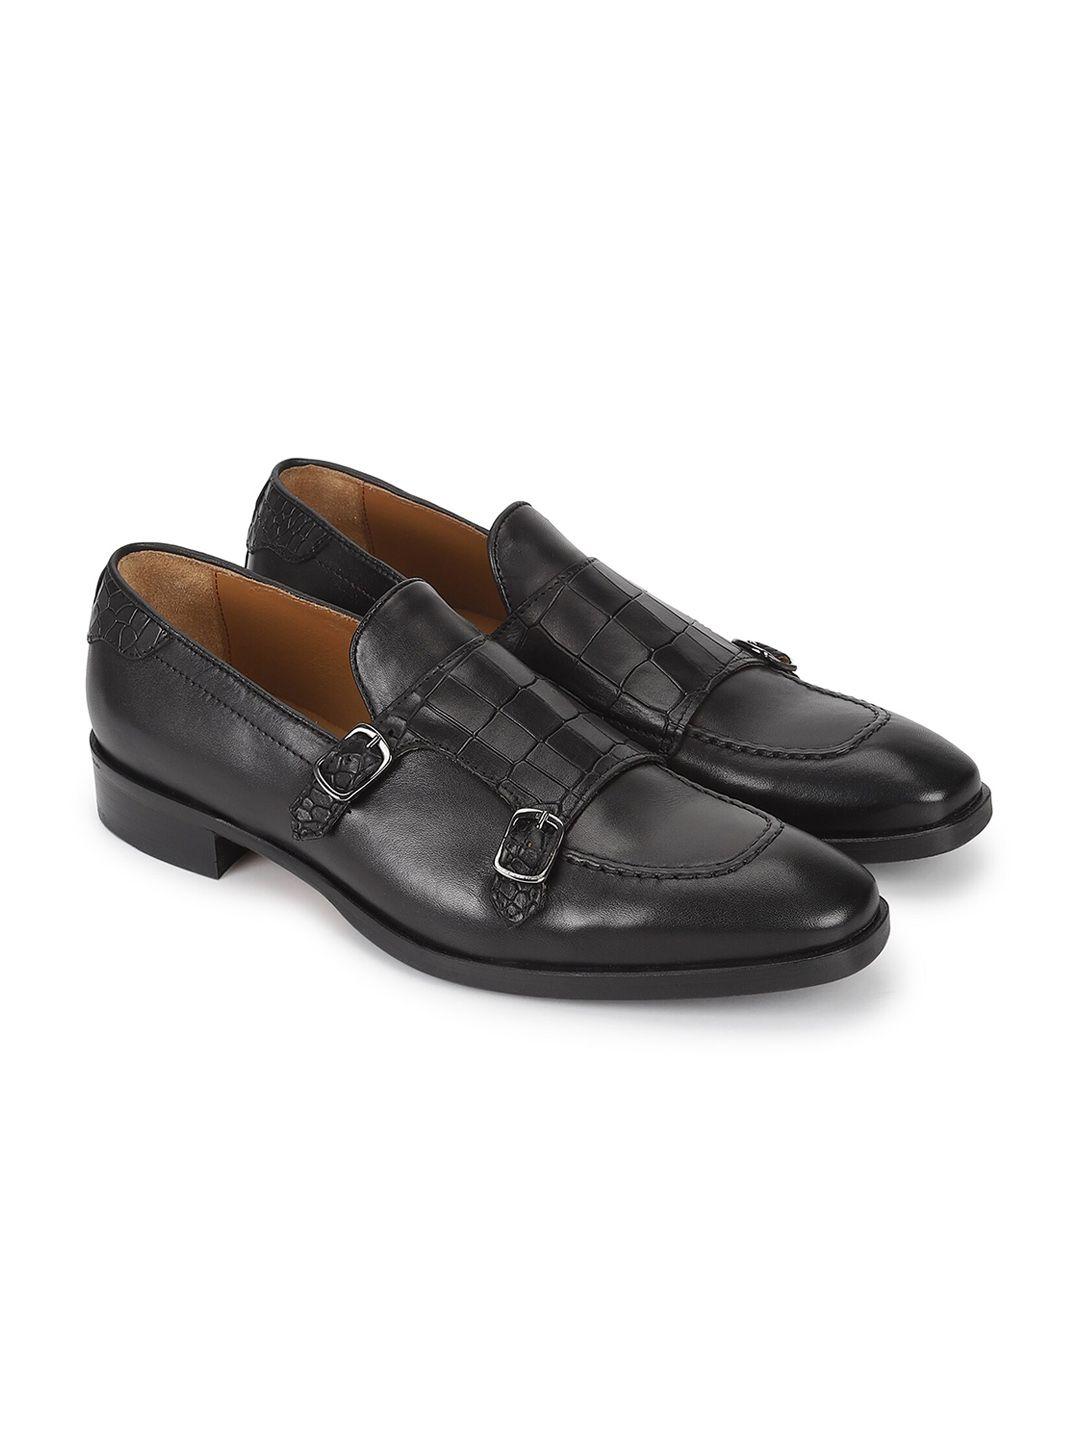 ted baker men textured leather double monk formal shoes